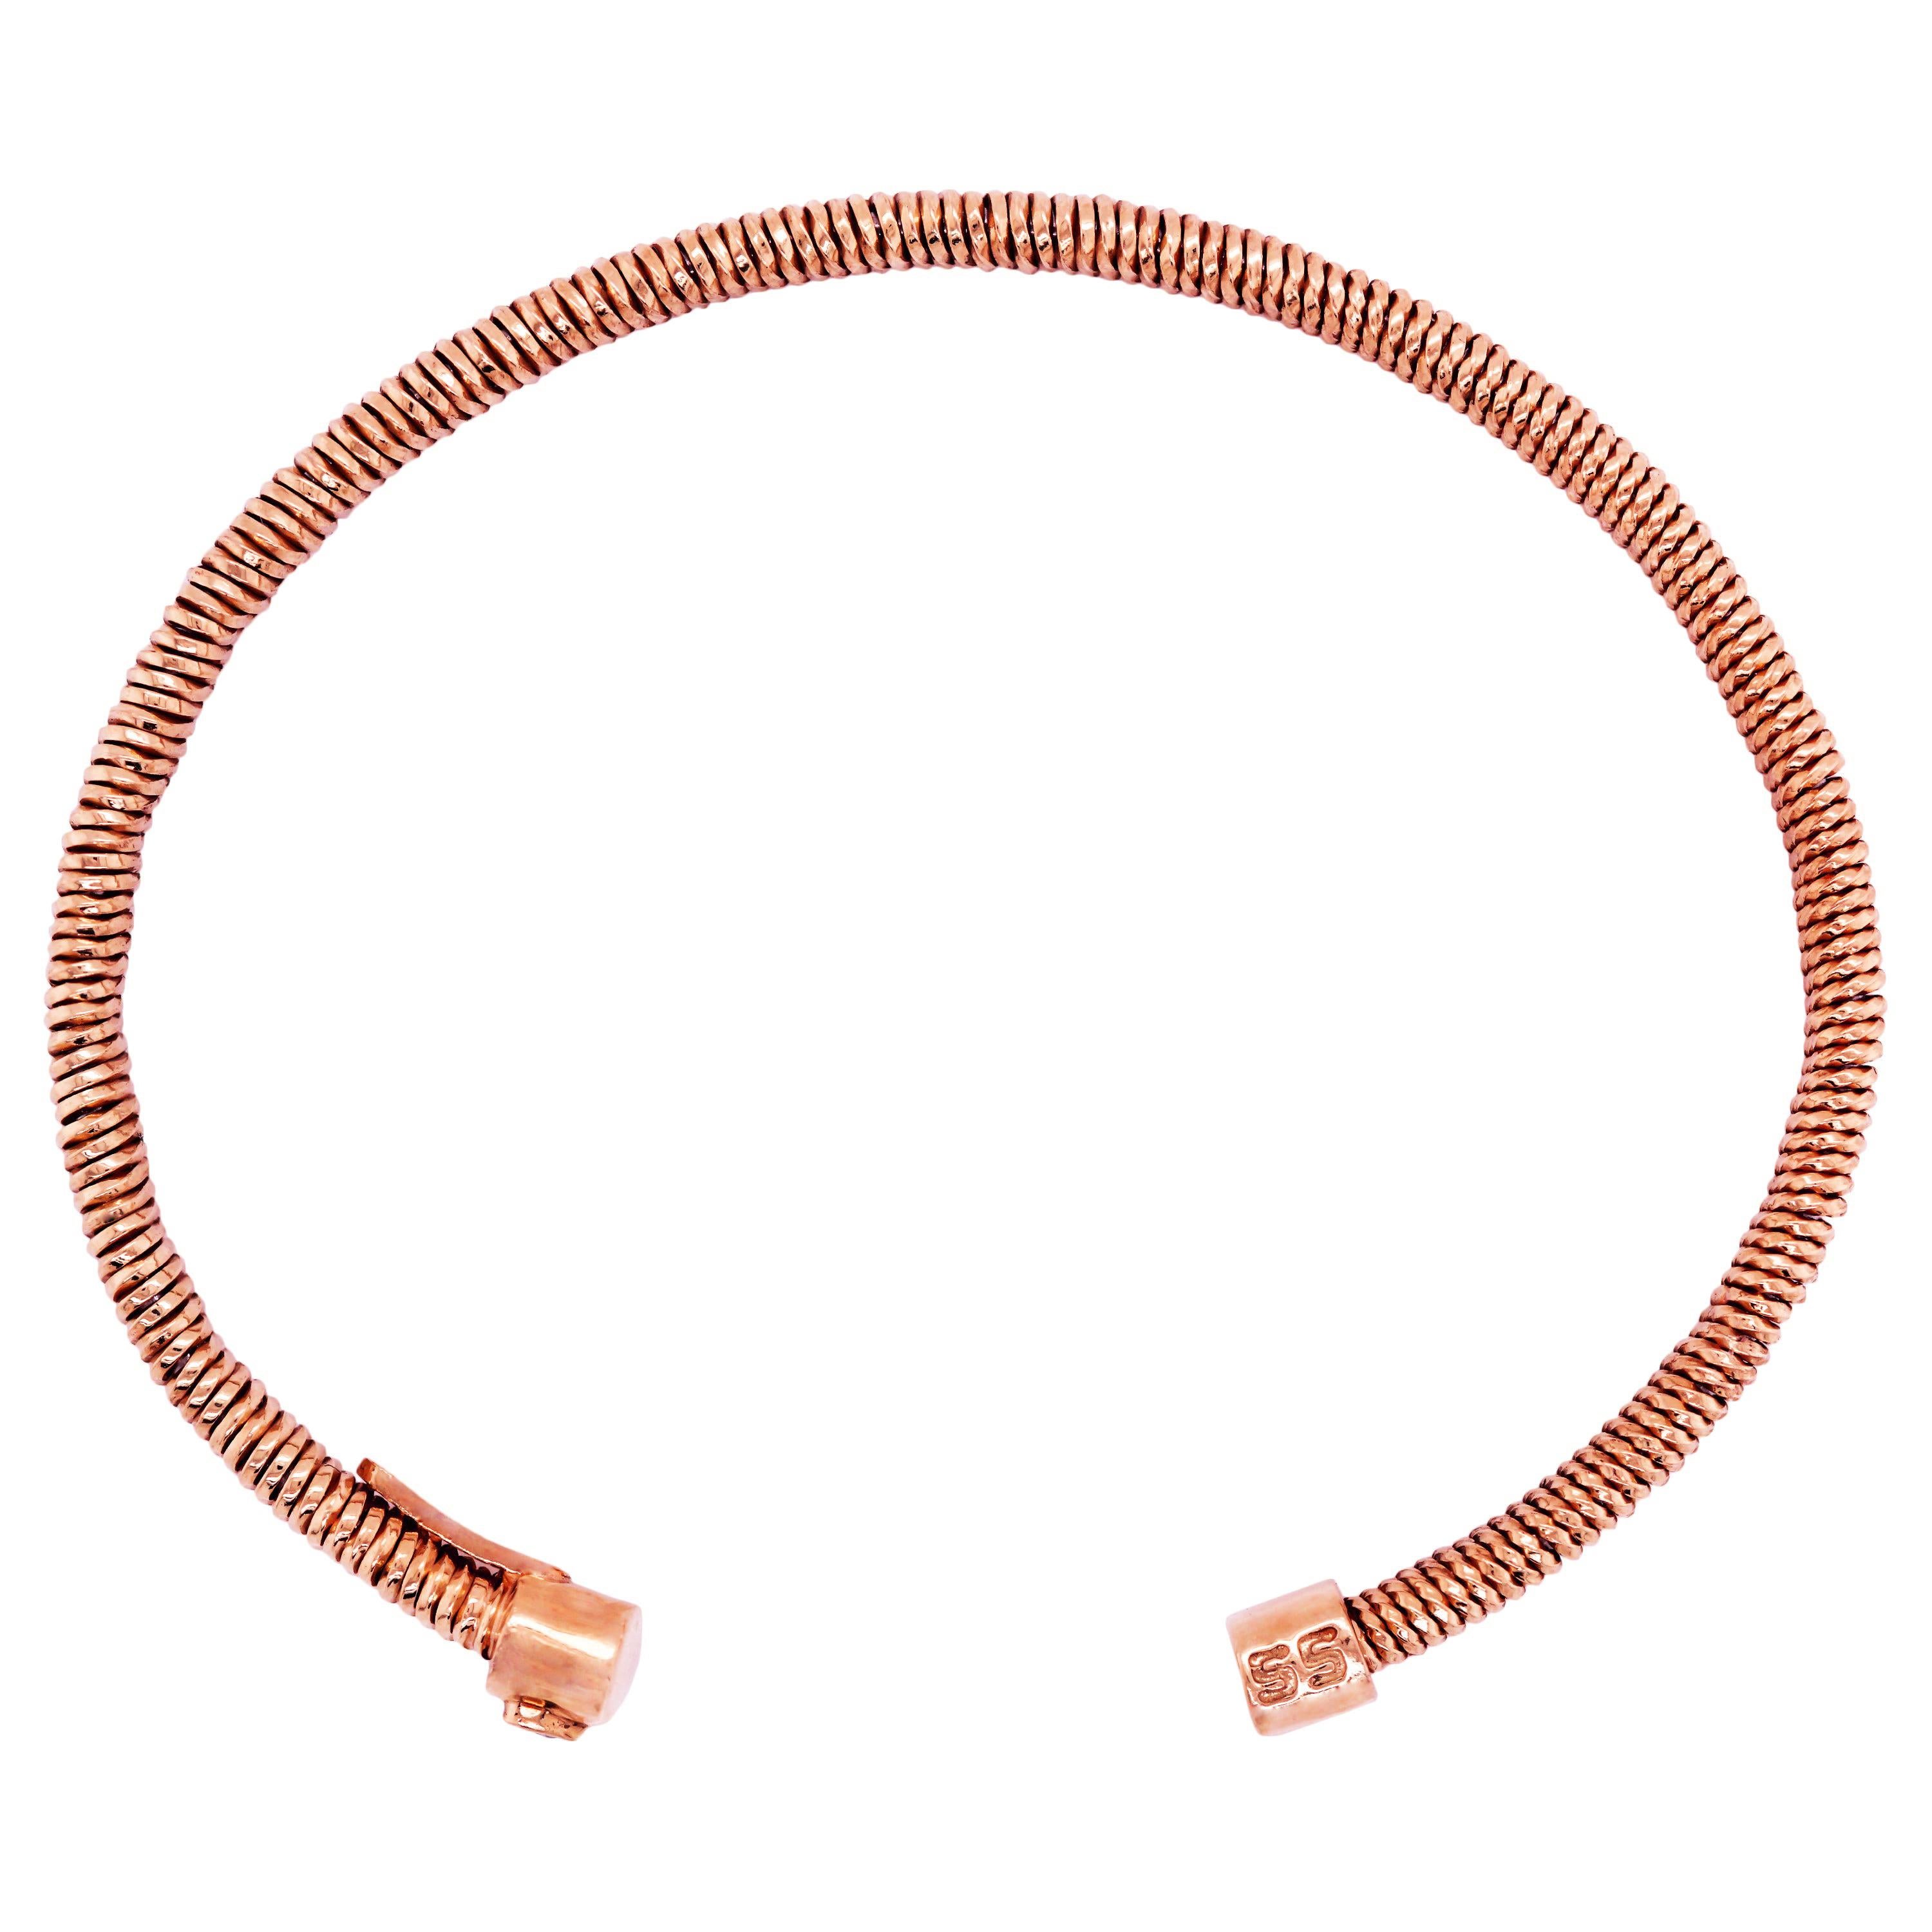 Stambolian 18K Rose Gold Thin Bangle Bracelet

This bracelet features high-polshed, woven-like textured gold that makes up the bracelet entirely

Bracelet is a size 7. 5mm width

Signed Stambolian and has the Trademark 